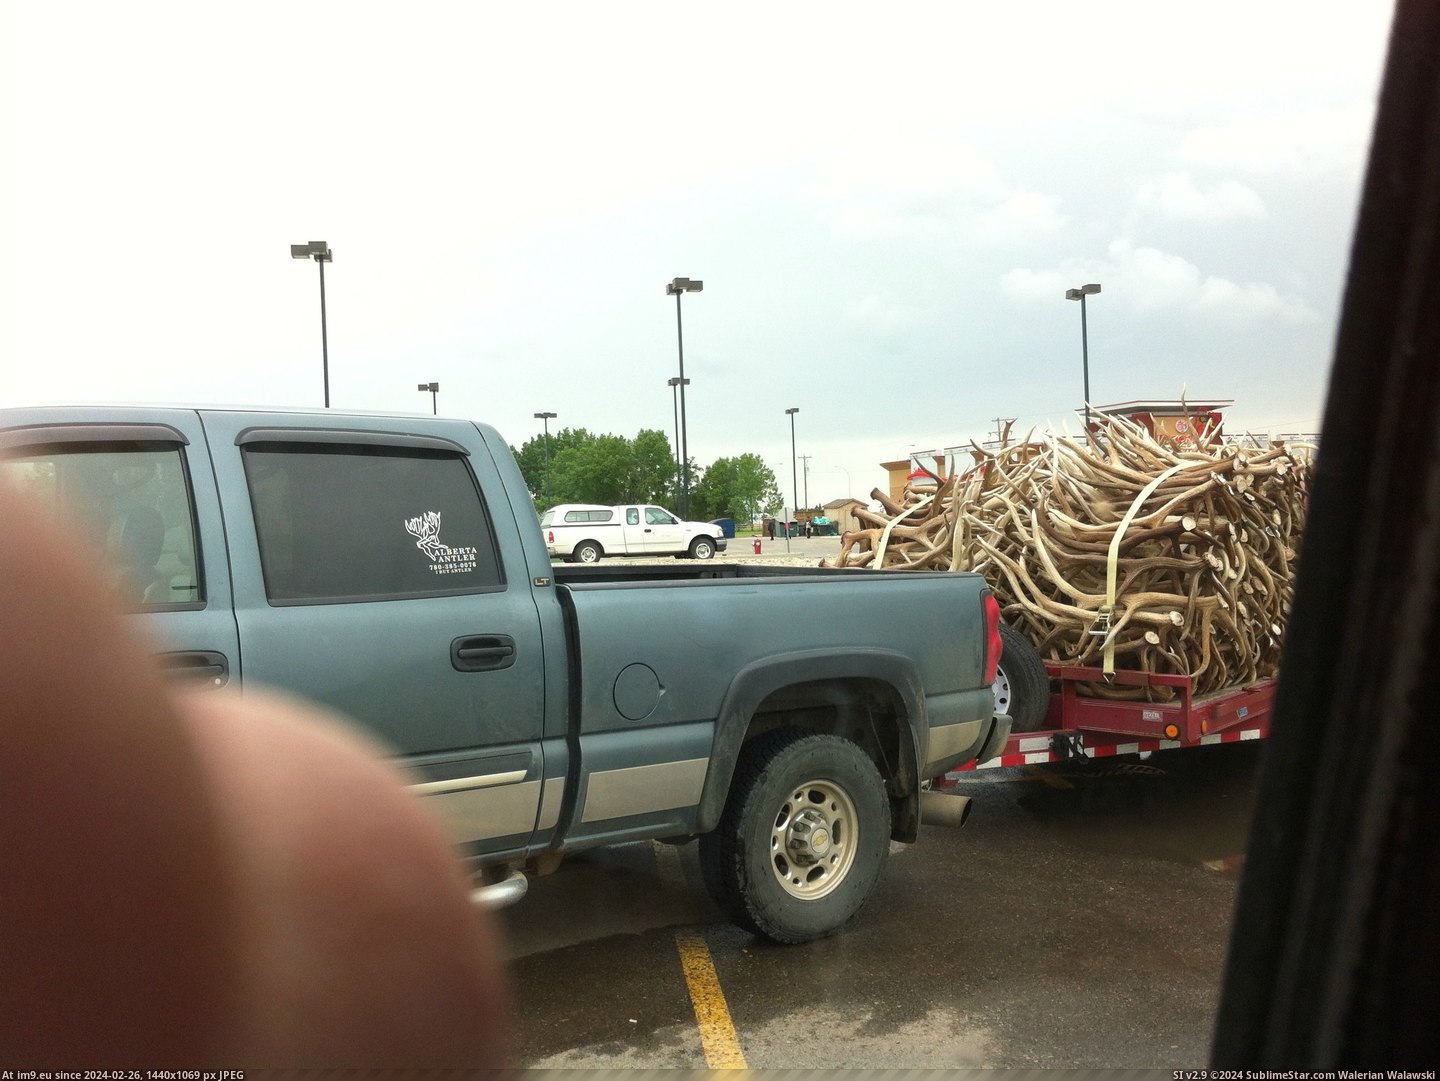 #Wtf #Get #Drive #Hunting #Successful #Season #Coffee [Wtf] Went to the drive-thru to get a coffee. Looks like a successful hunting season. 2 Pic. (Image of album My r/WTF favs))